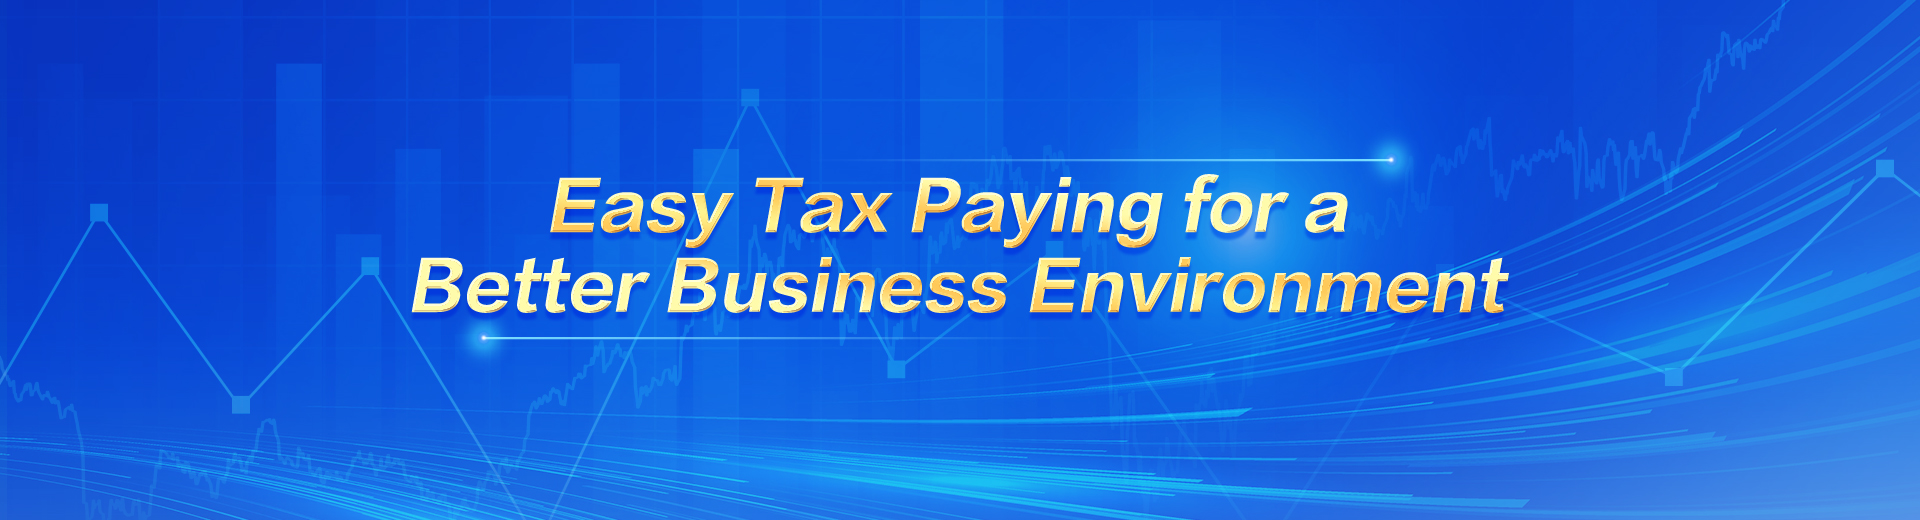 Easy Tax Paying for a Better Business Environment